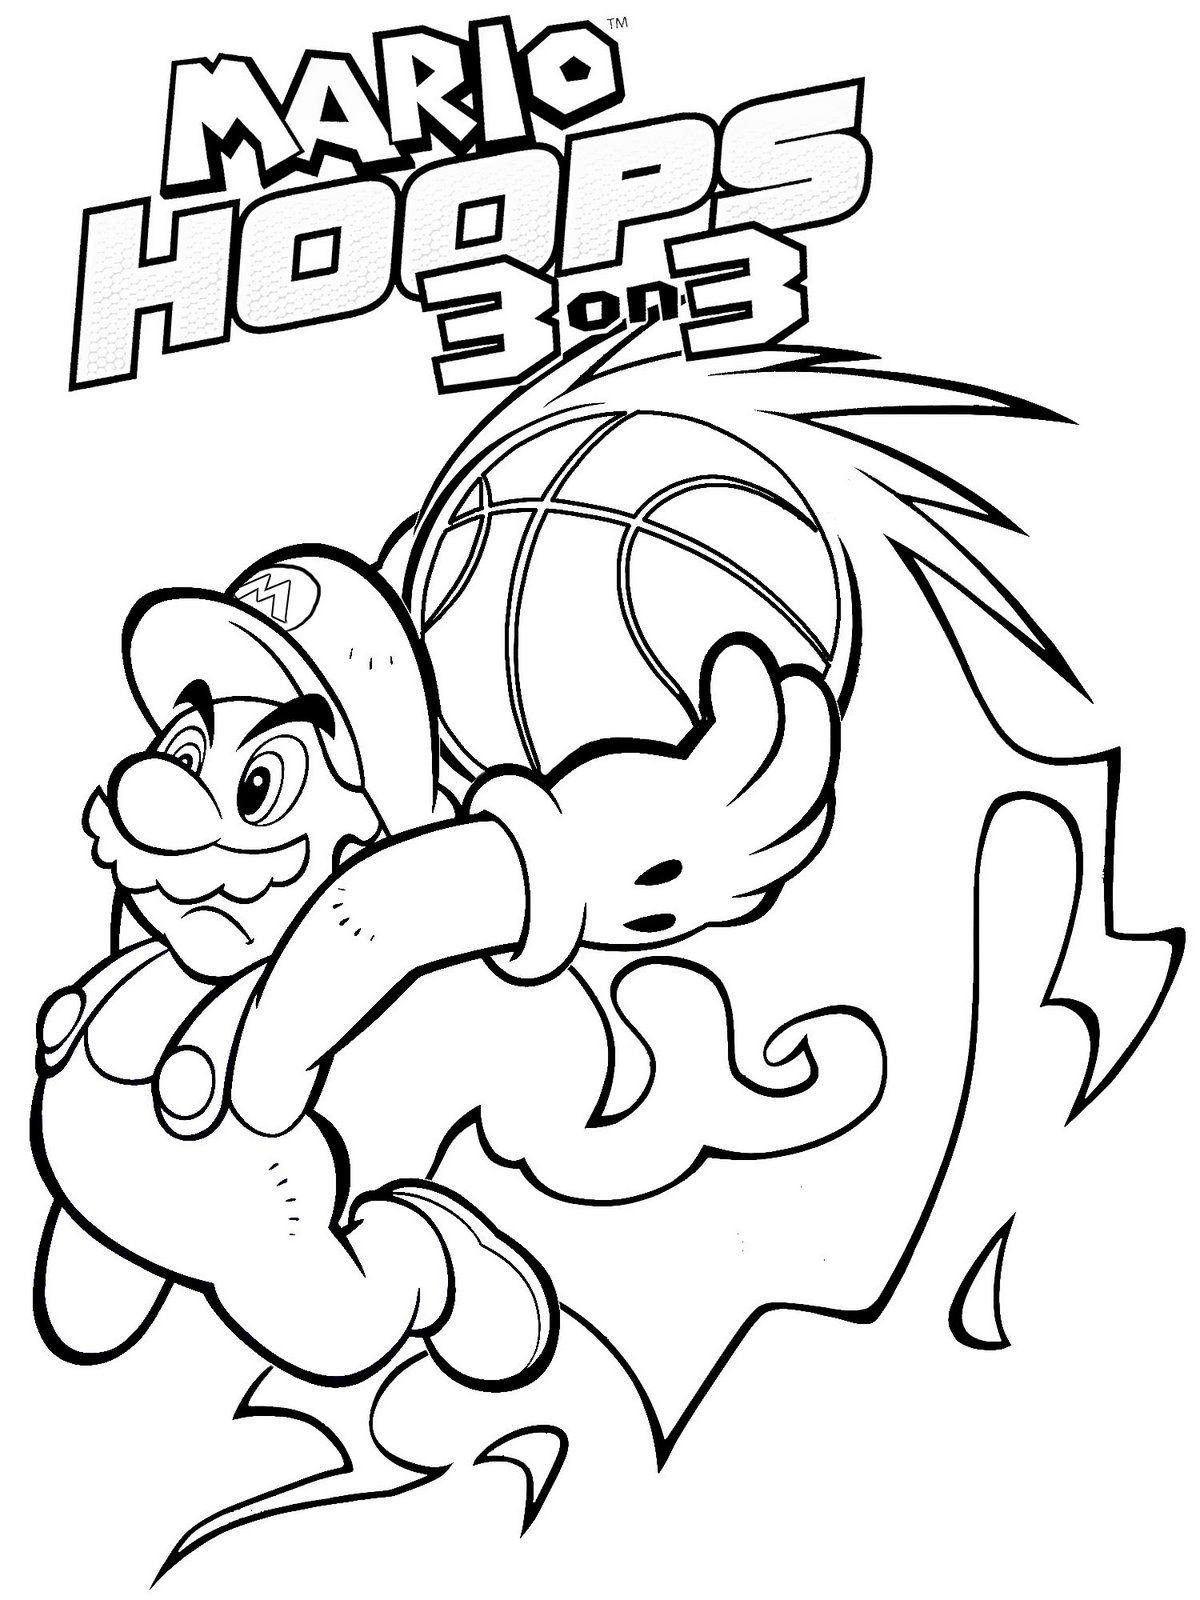 Mario coloring pages | color printing | coloring pages printable | coloring book pages | #6